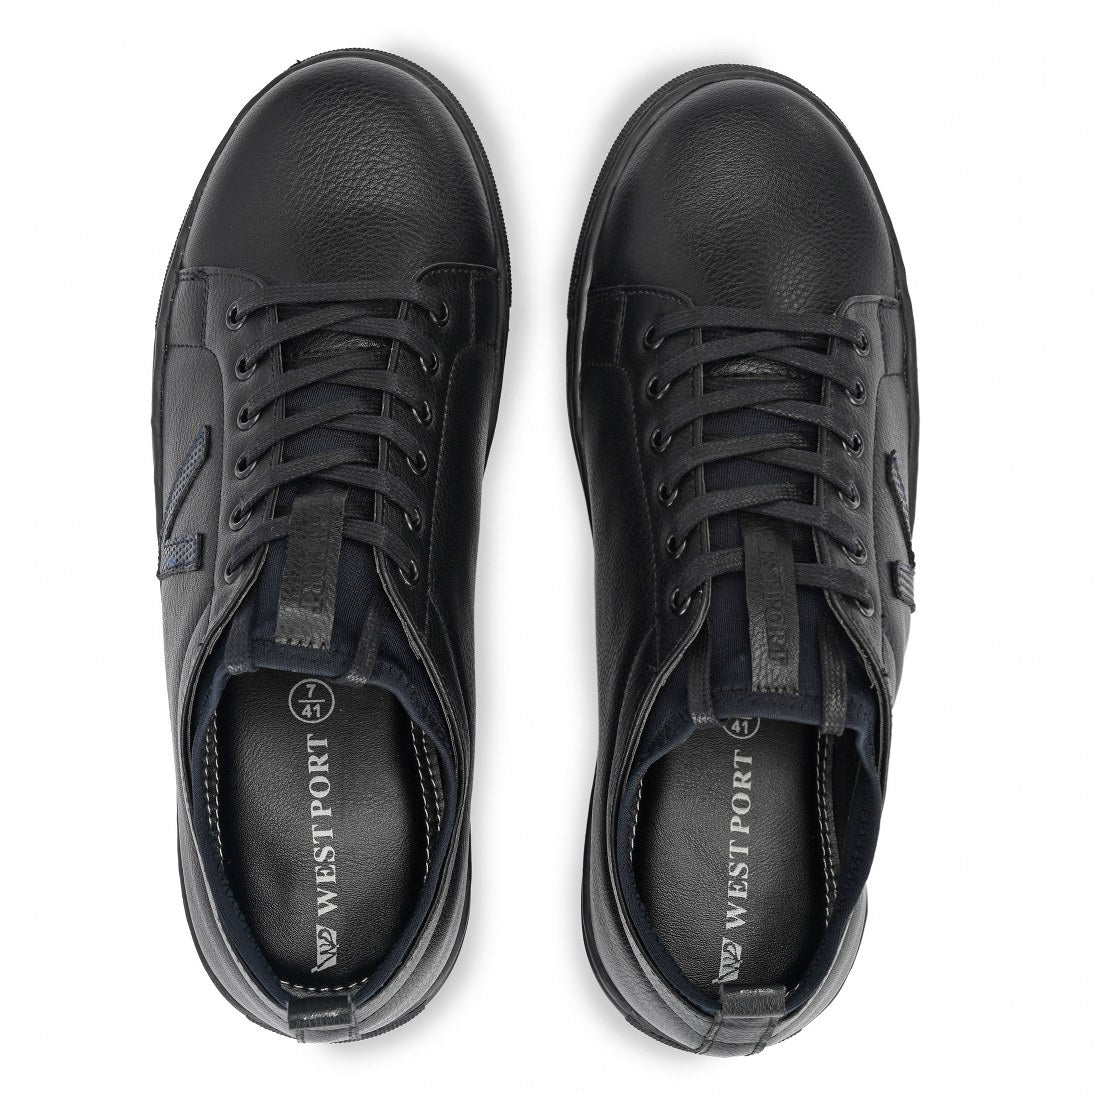 FUN-55 MEN NON-LEATHER BLACK CASUAL LACE UP SNEAKERS